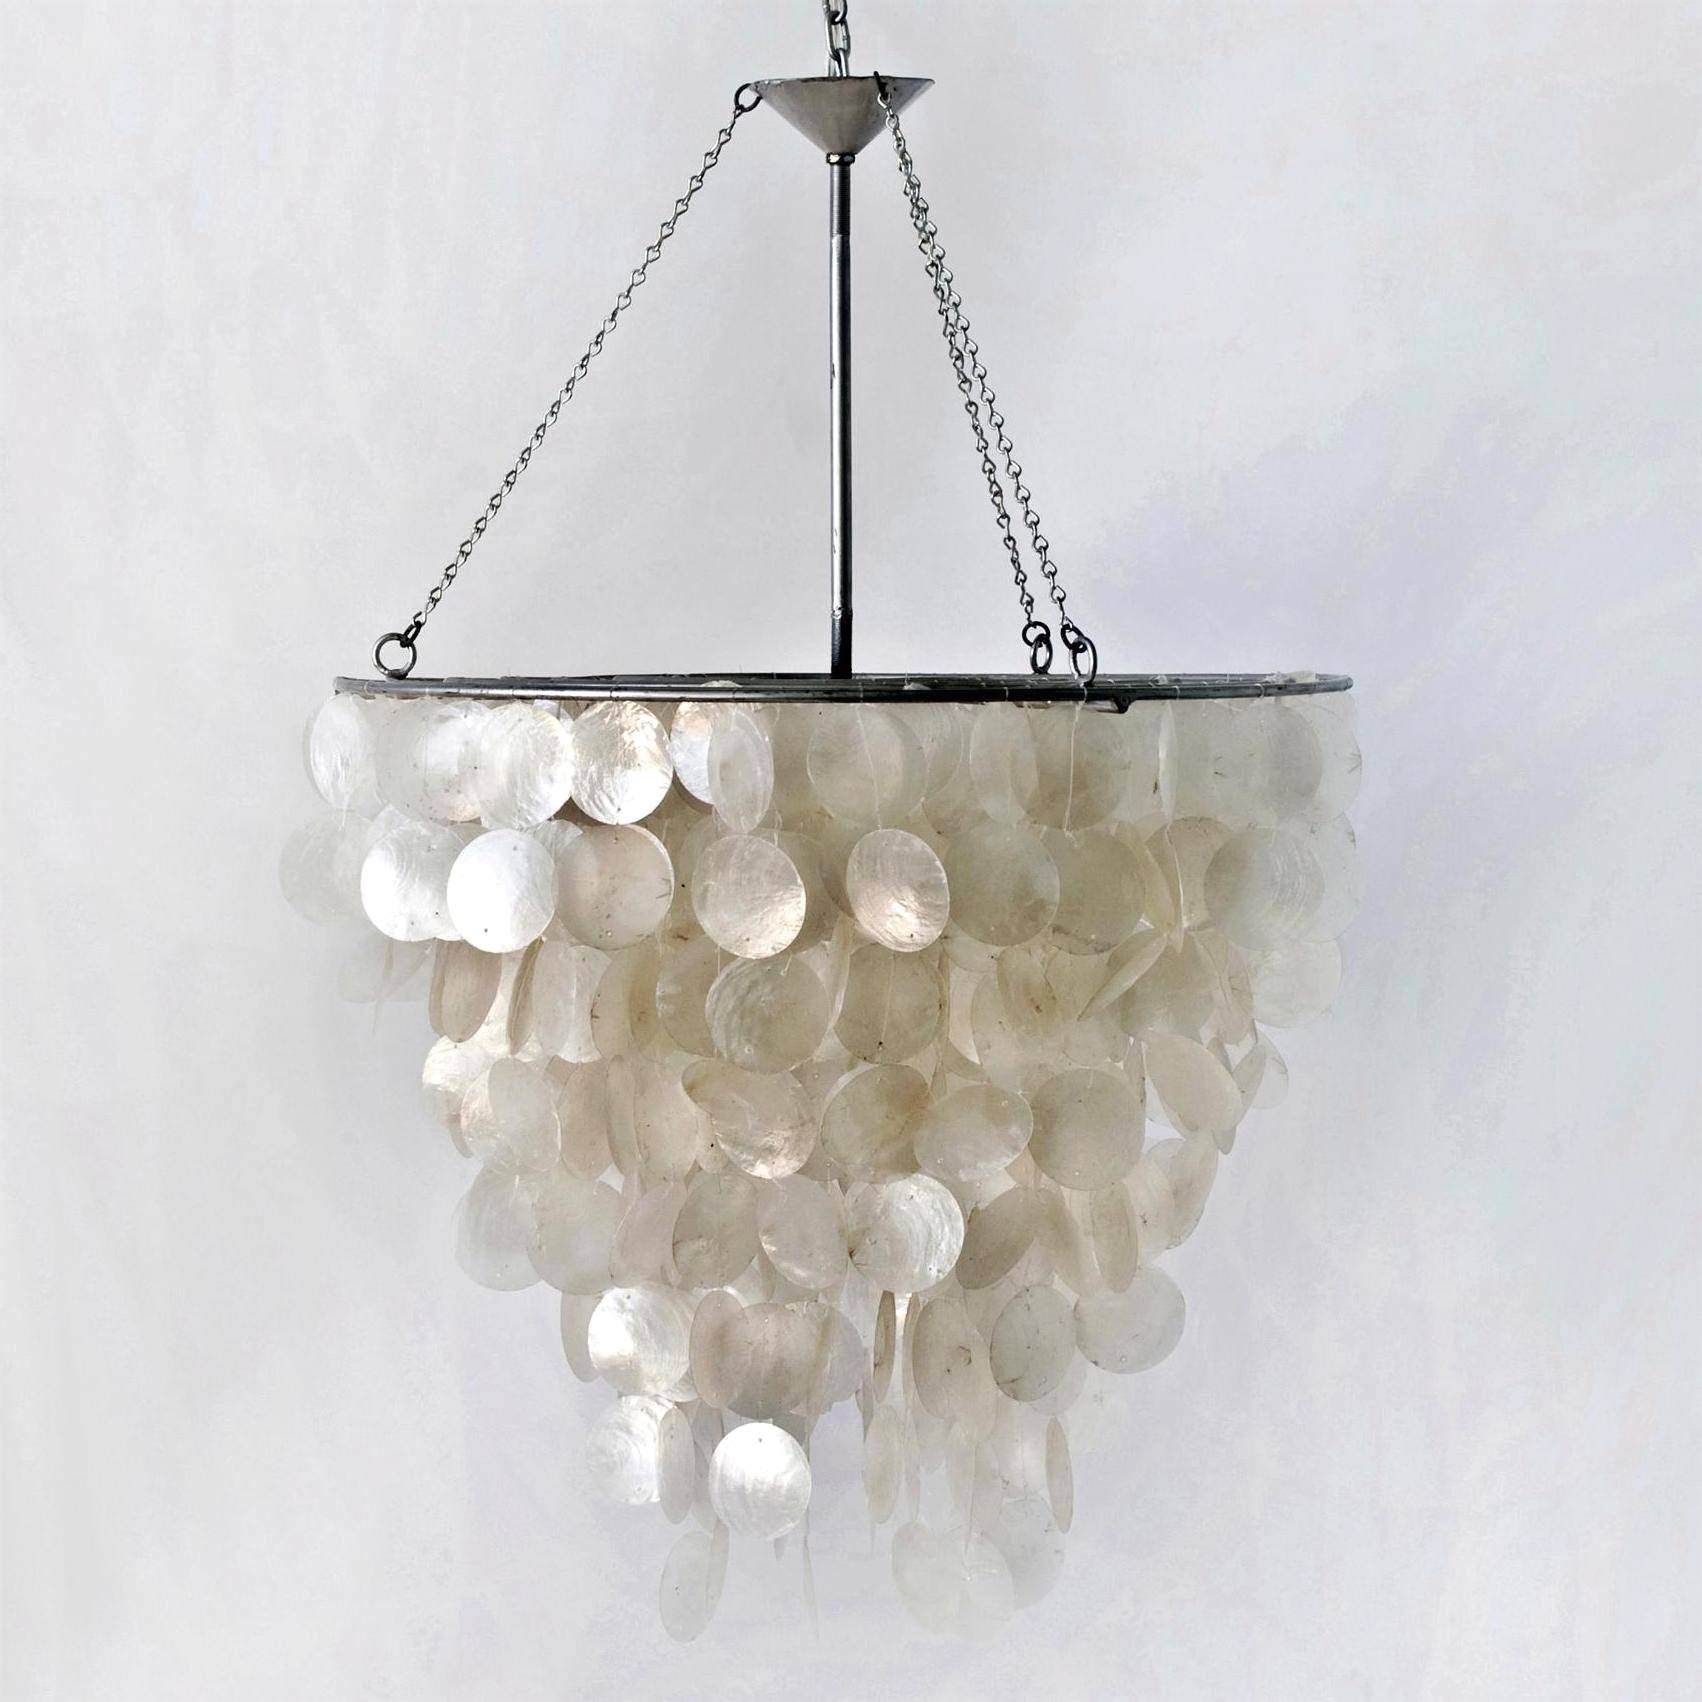 Chandeliers Design : Wonderful Small Capiz Shell Chandelier And With Sea Glass Pendant Lights (View 5 of 15)